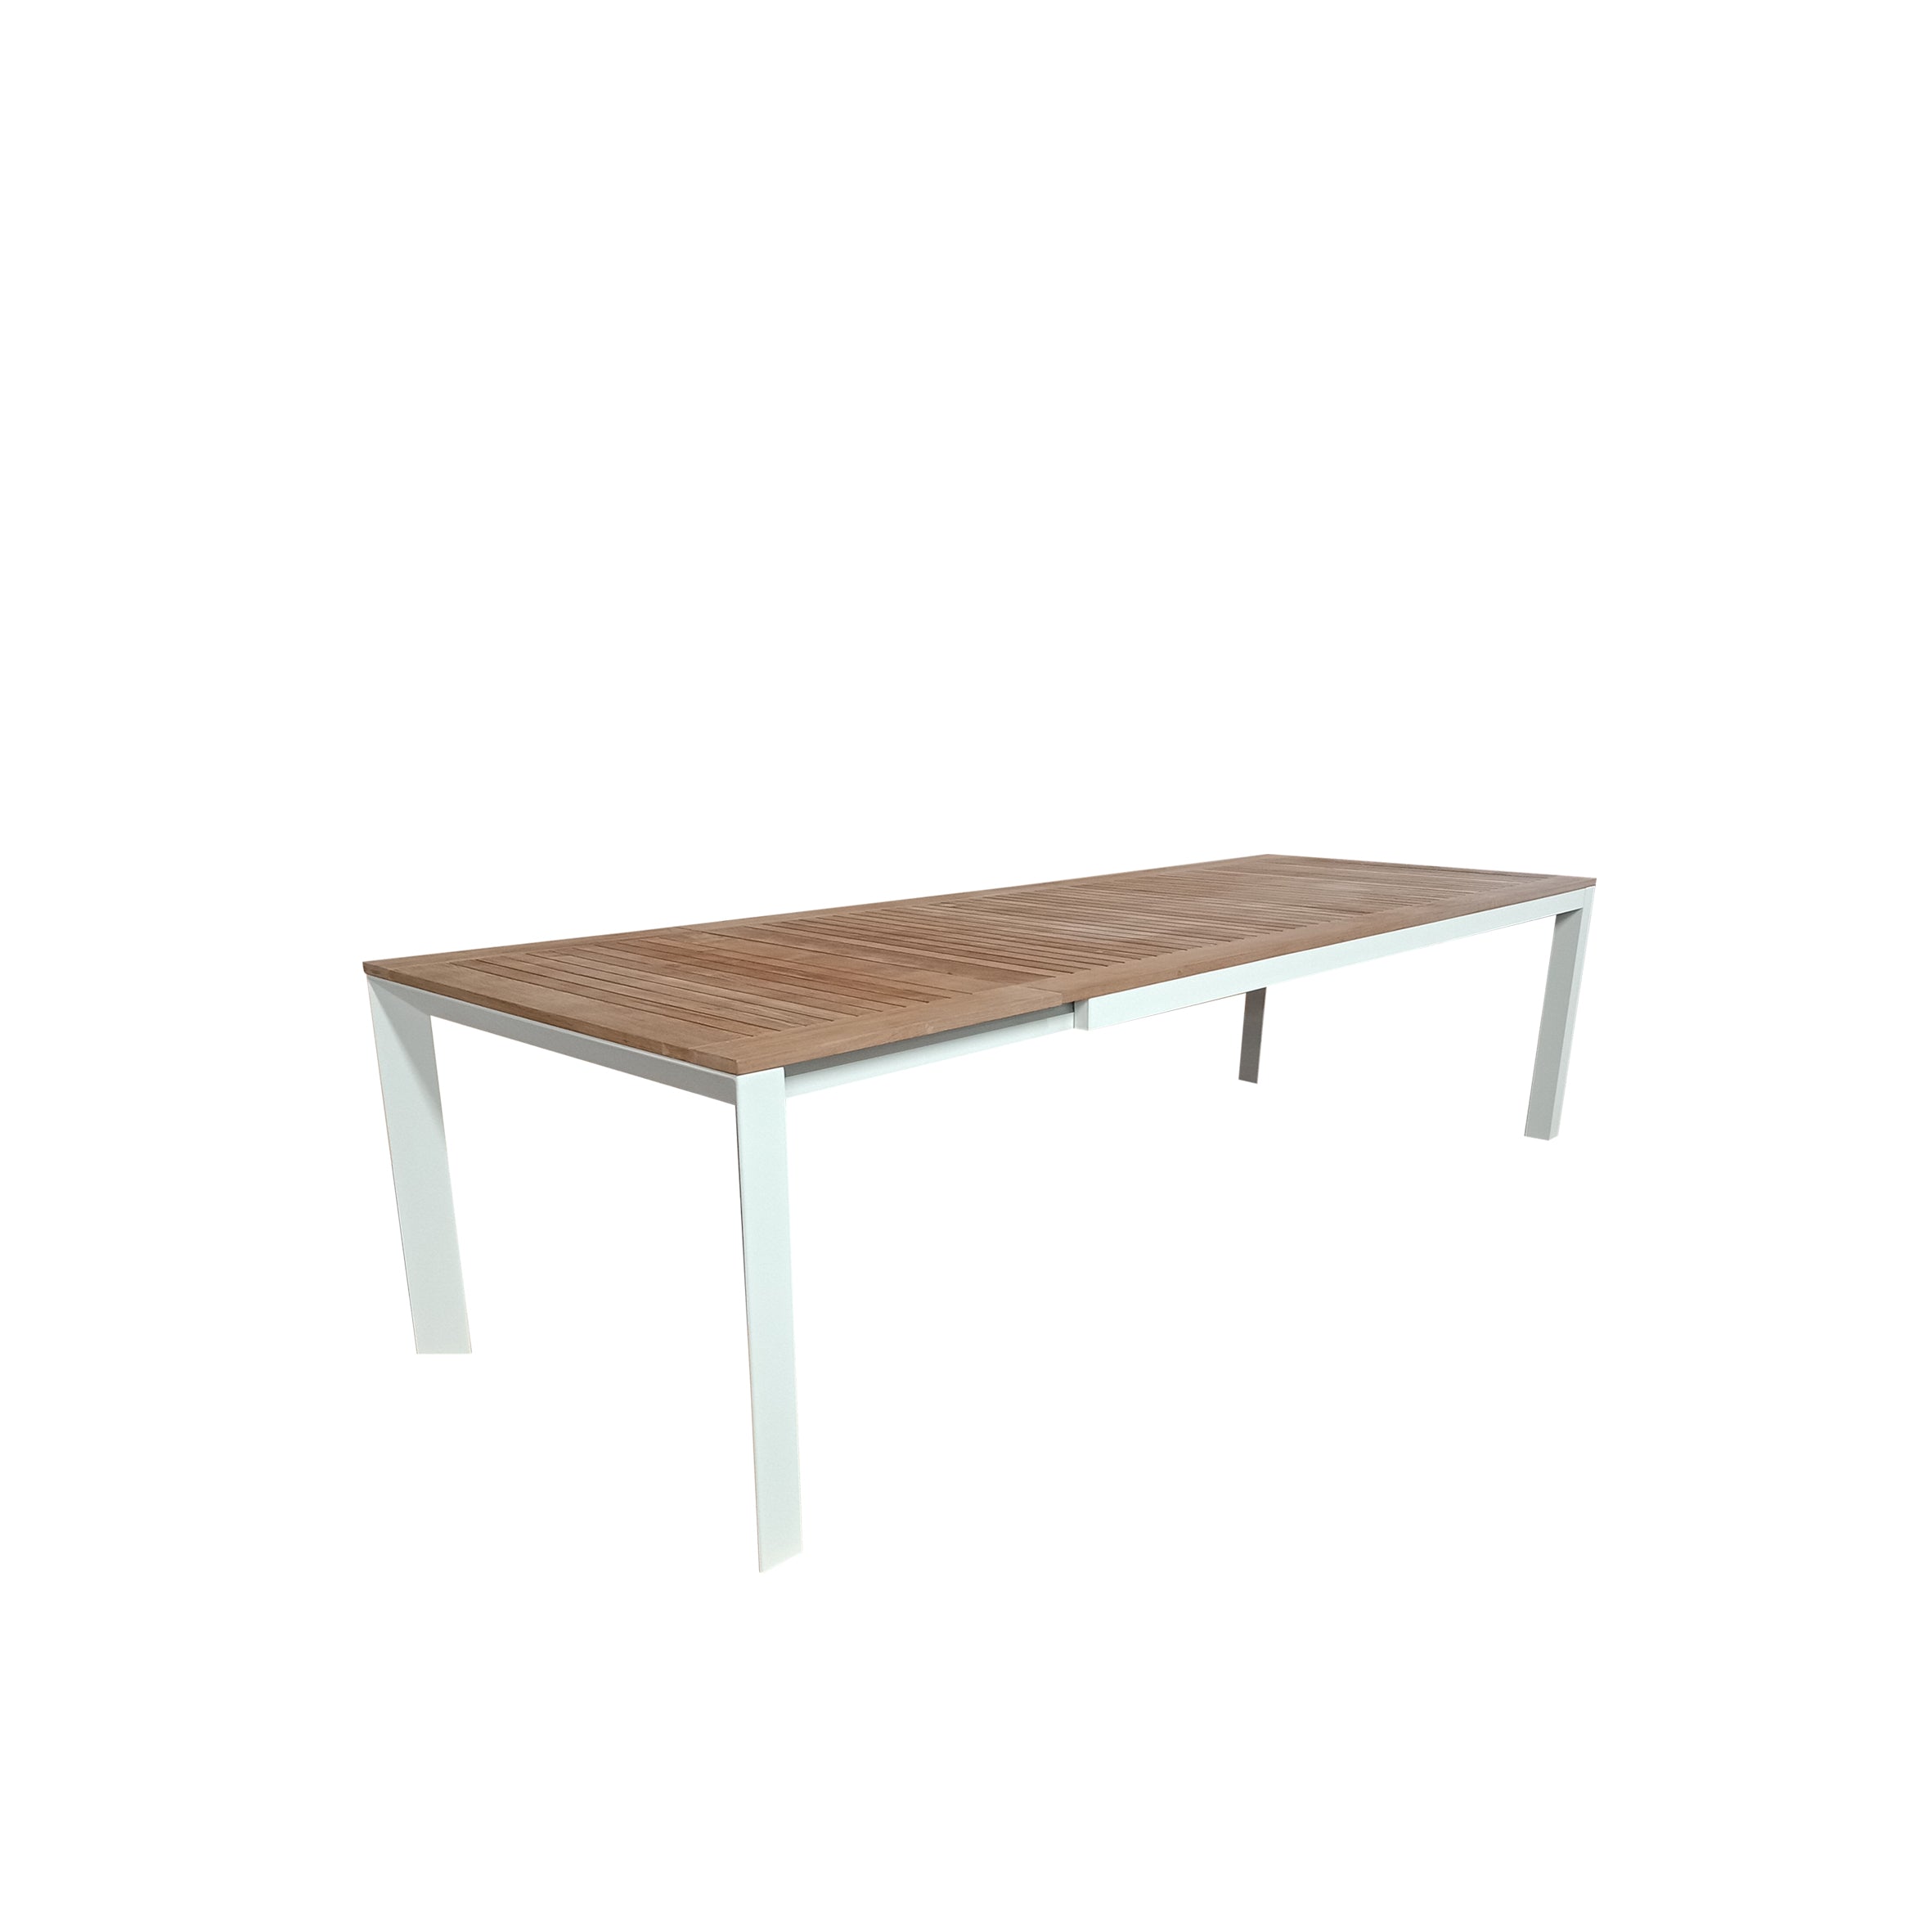 Grove Small Extension Outdoor Dining Table 160/220x100 - White Powdercoated Aluminum w. Teak Top